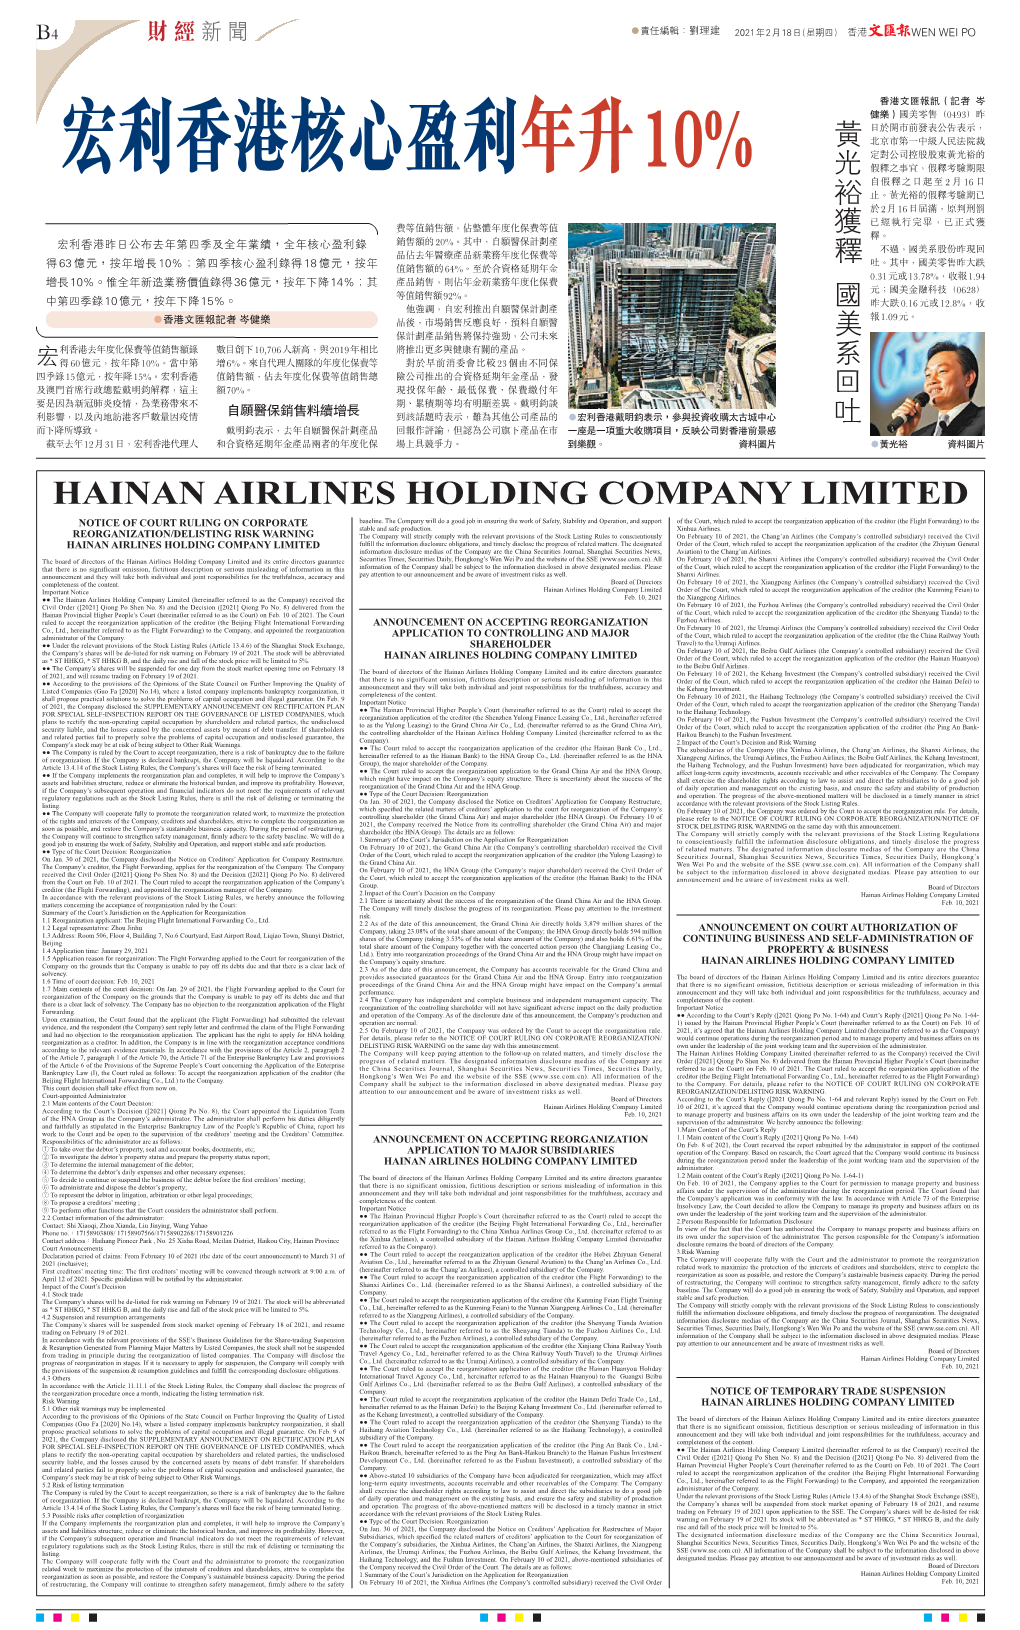 HAINAN AIRLINES HOLDING COMPANY LIMITED NOTICE of COURT RULING on CORPORATE Baseline